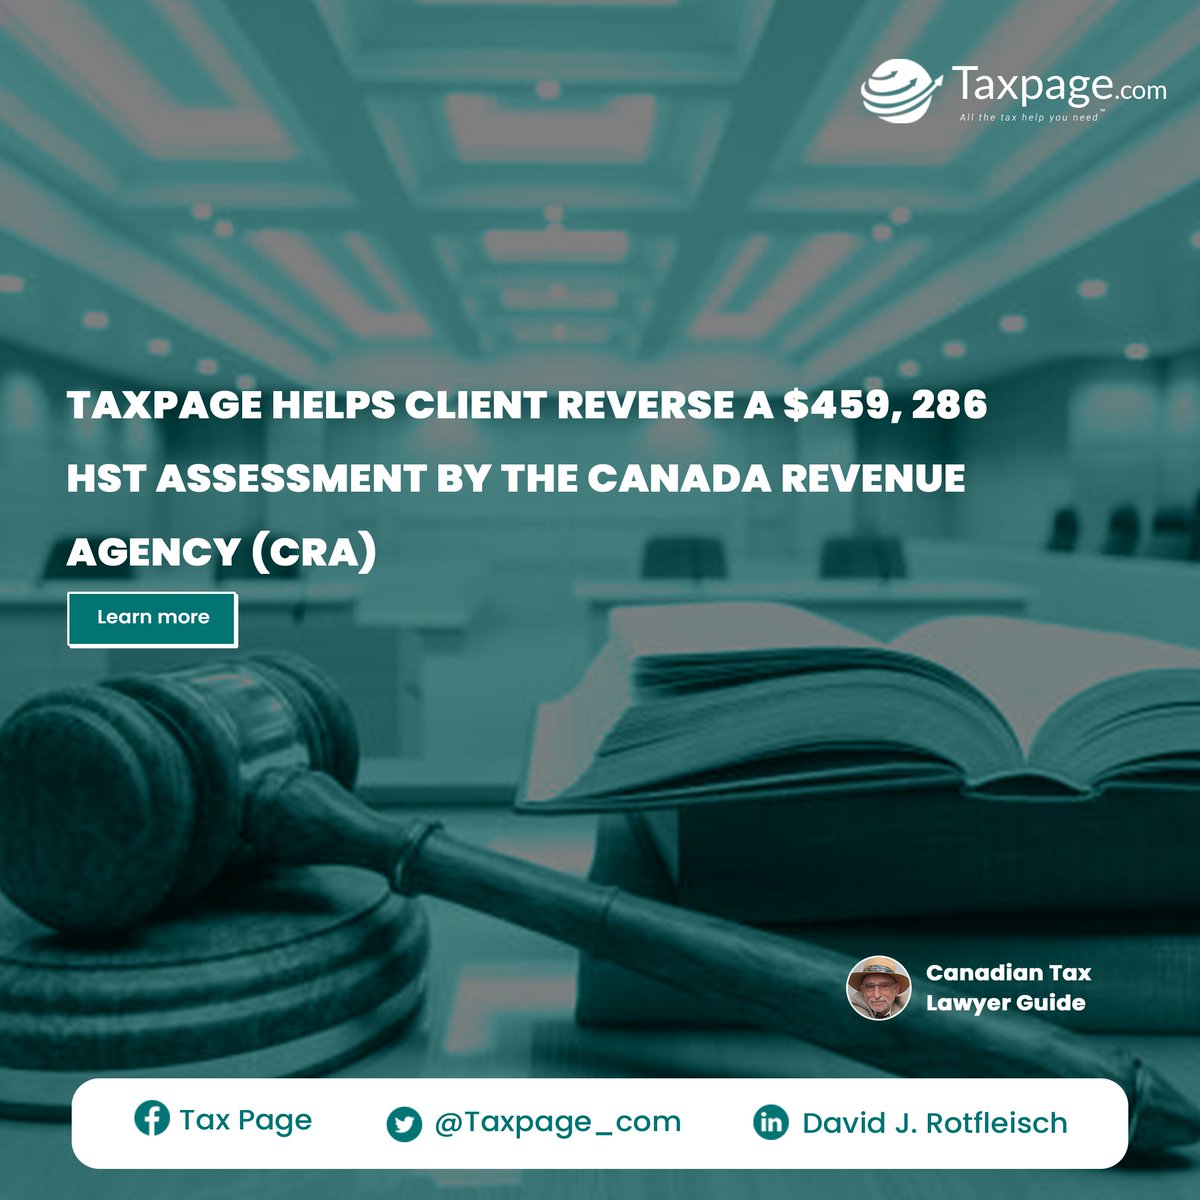 Taxpage helps client reverse a $459,286 HST assessment by the Canada Revenue Agency (CRA)

#Thread

#Taxpage #Taxlitigation #CaseStudy #Canada